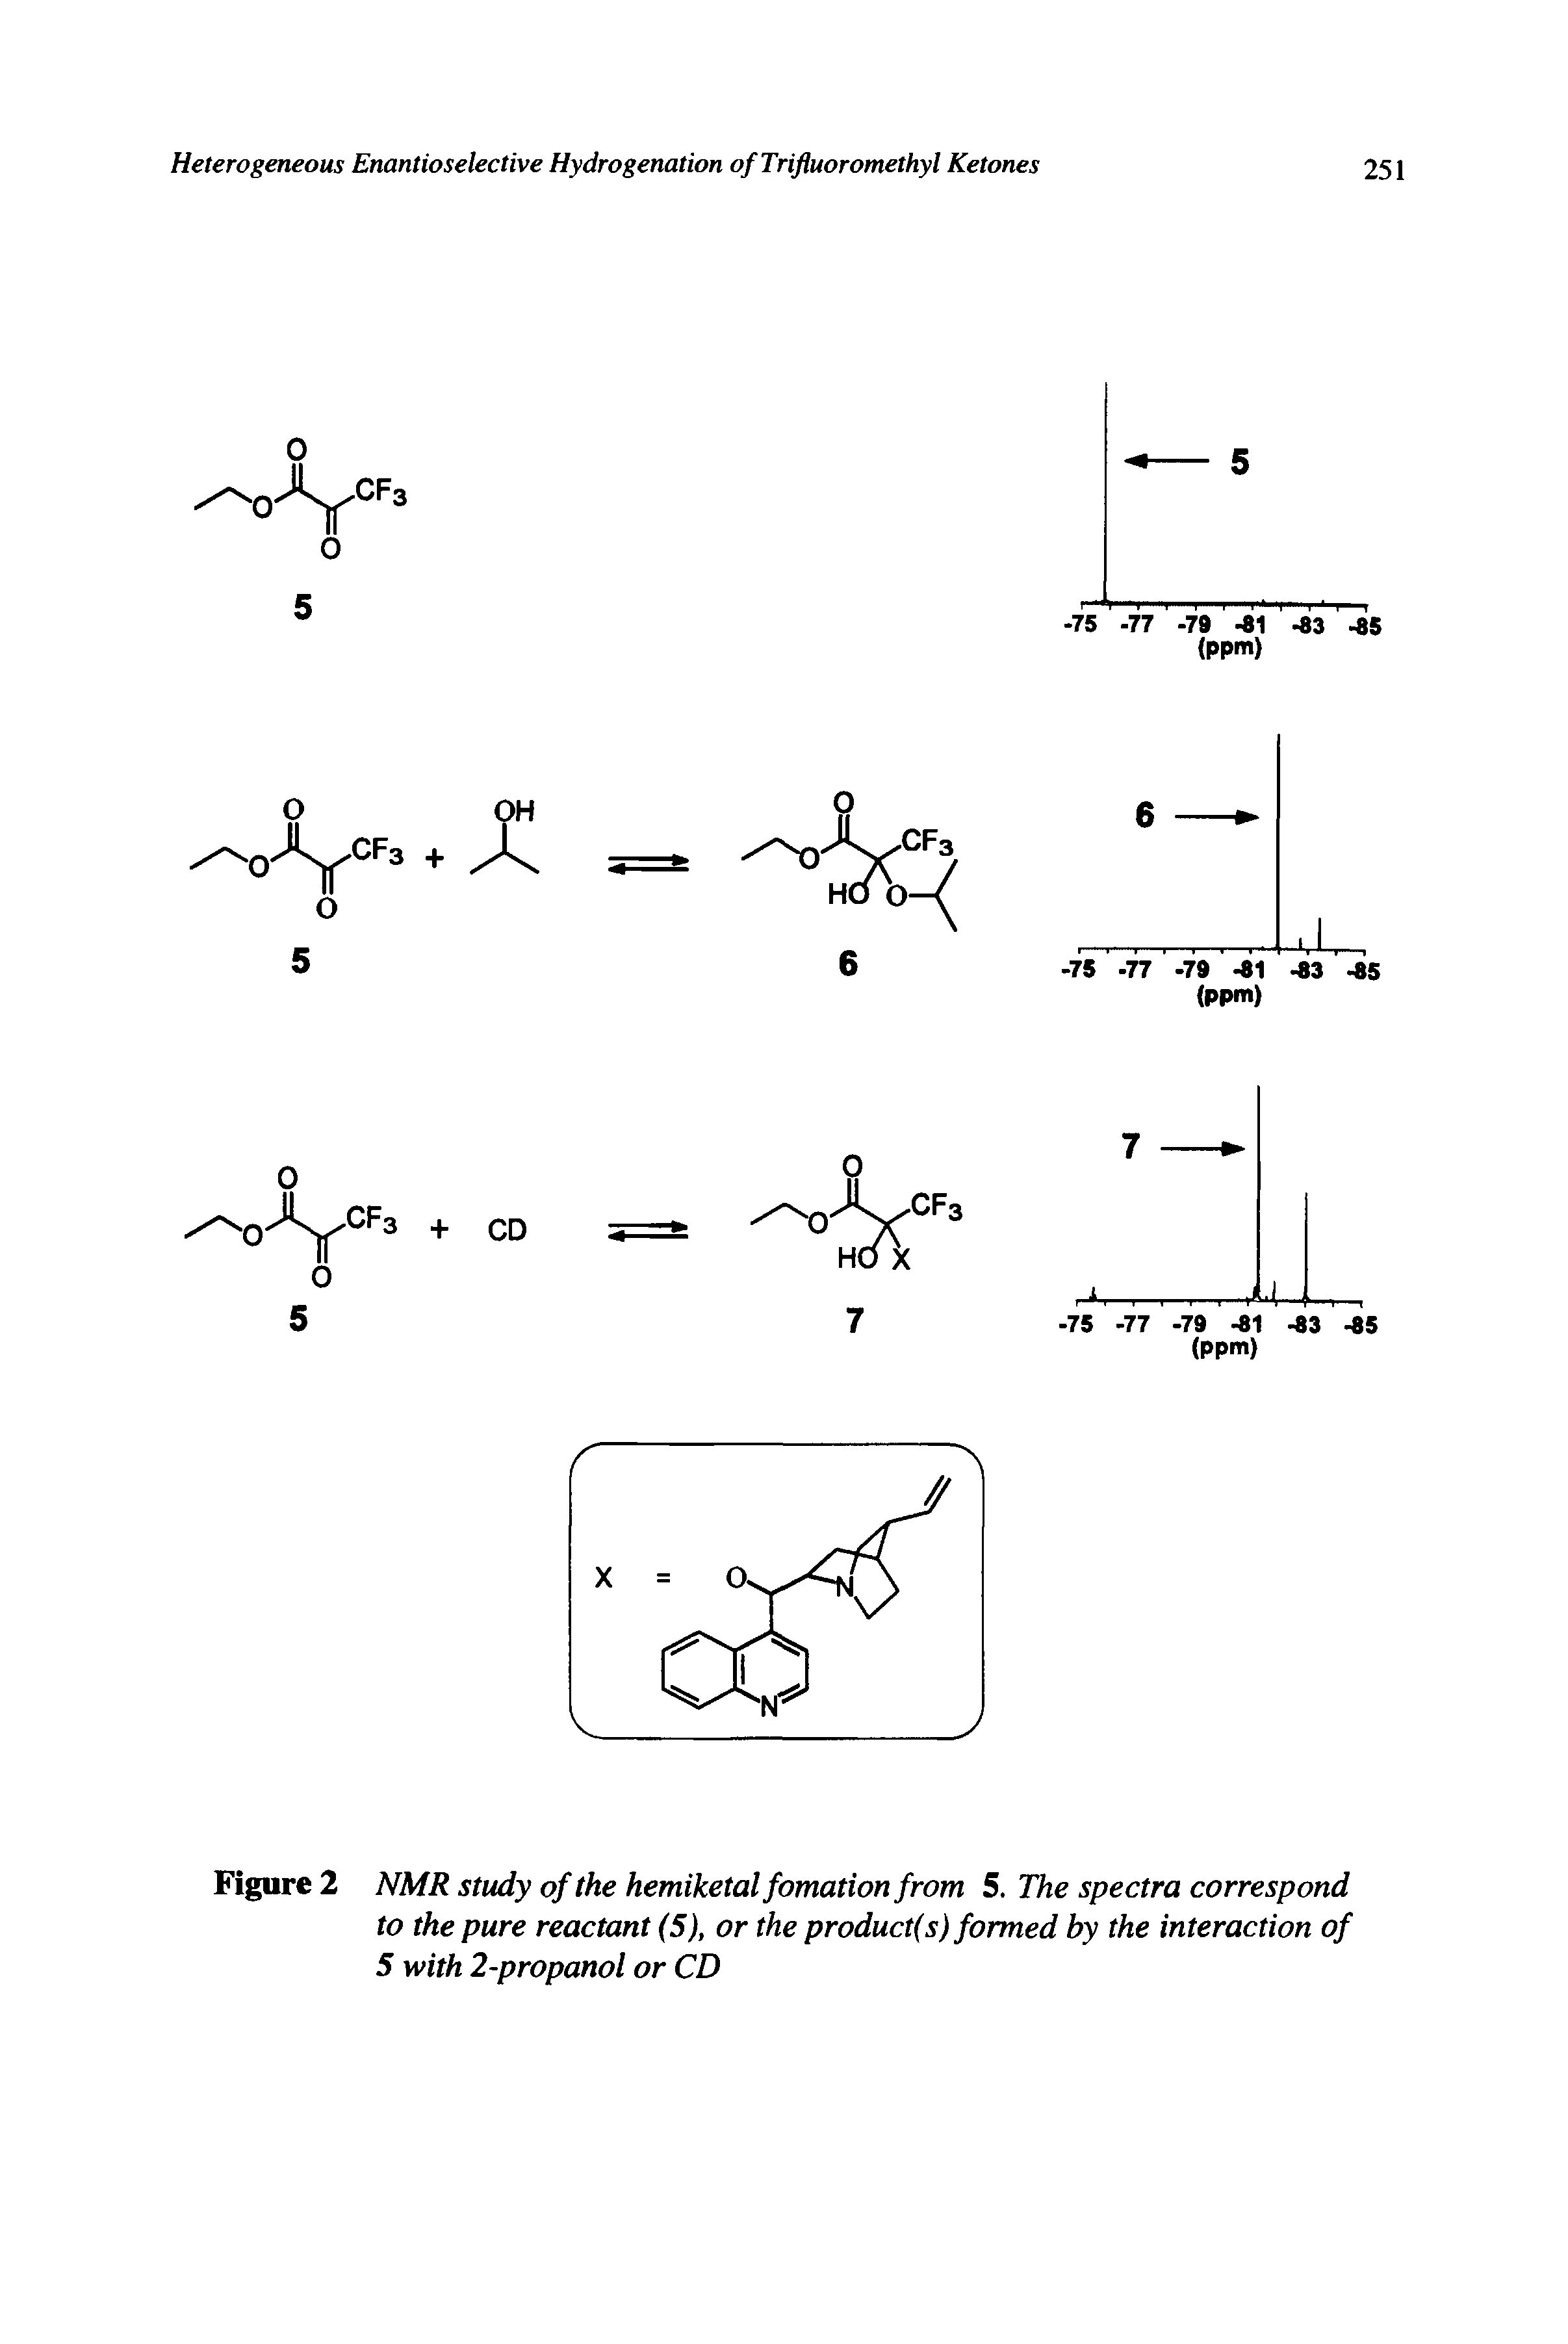 Figure 2 NMR study of the hemiketal formation from 5. The spectra correspond to the pure reactant (5), or the product(s) formed by the interaction of 5 with 2-propanol or CD...